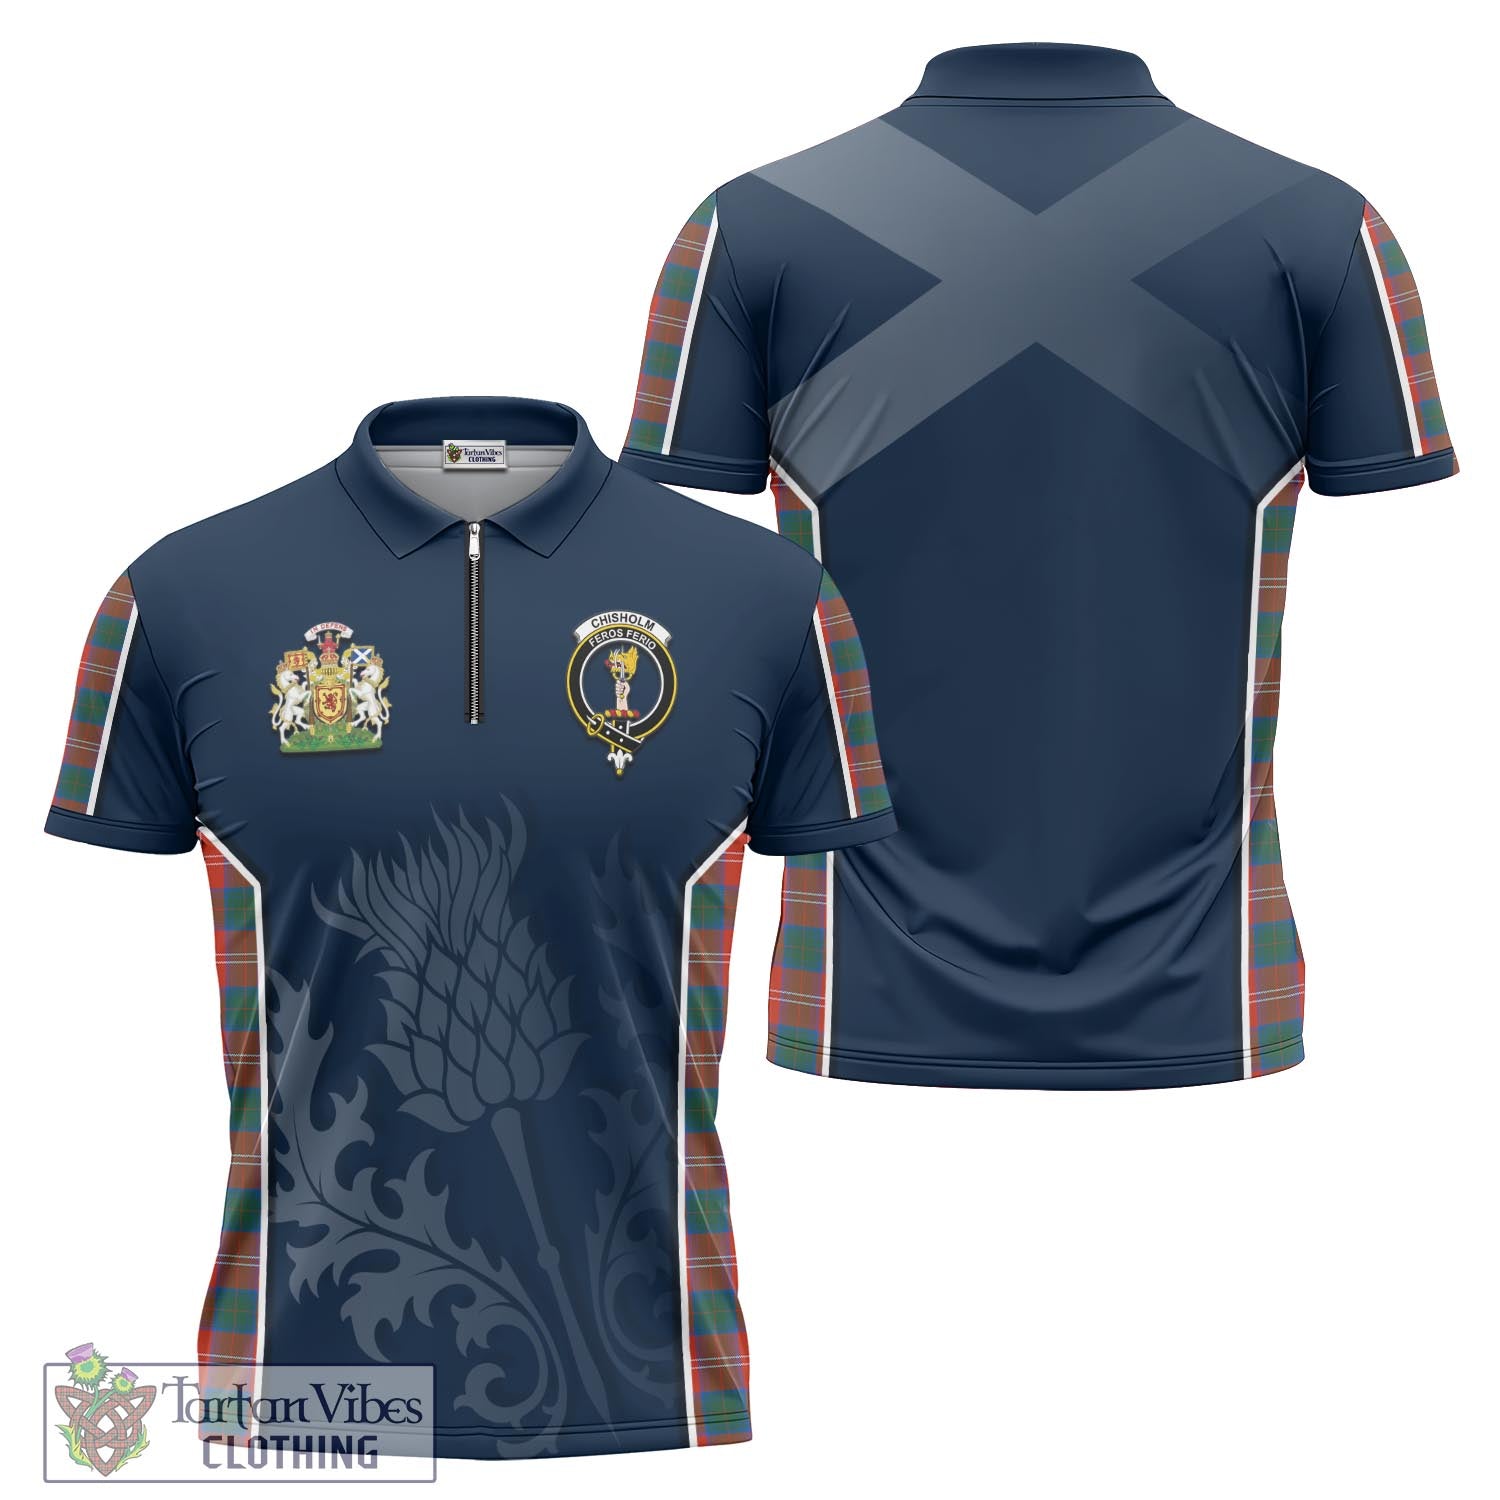 Tartan Vibes Clothing Chisholm Ancient Tartan Zipper Polo Shirt with Family Crest and Scottish Thistle Vibes Sport Style